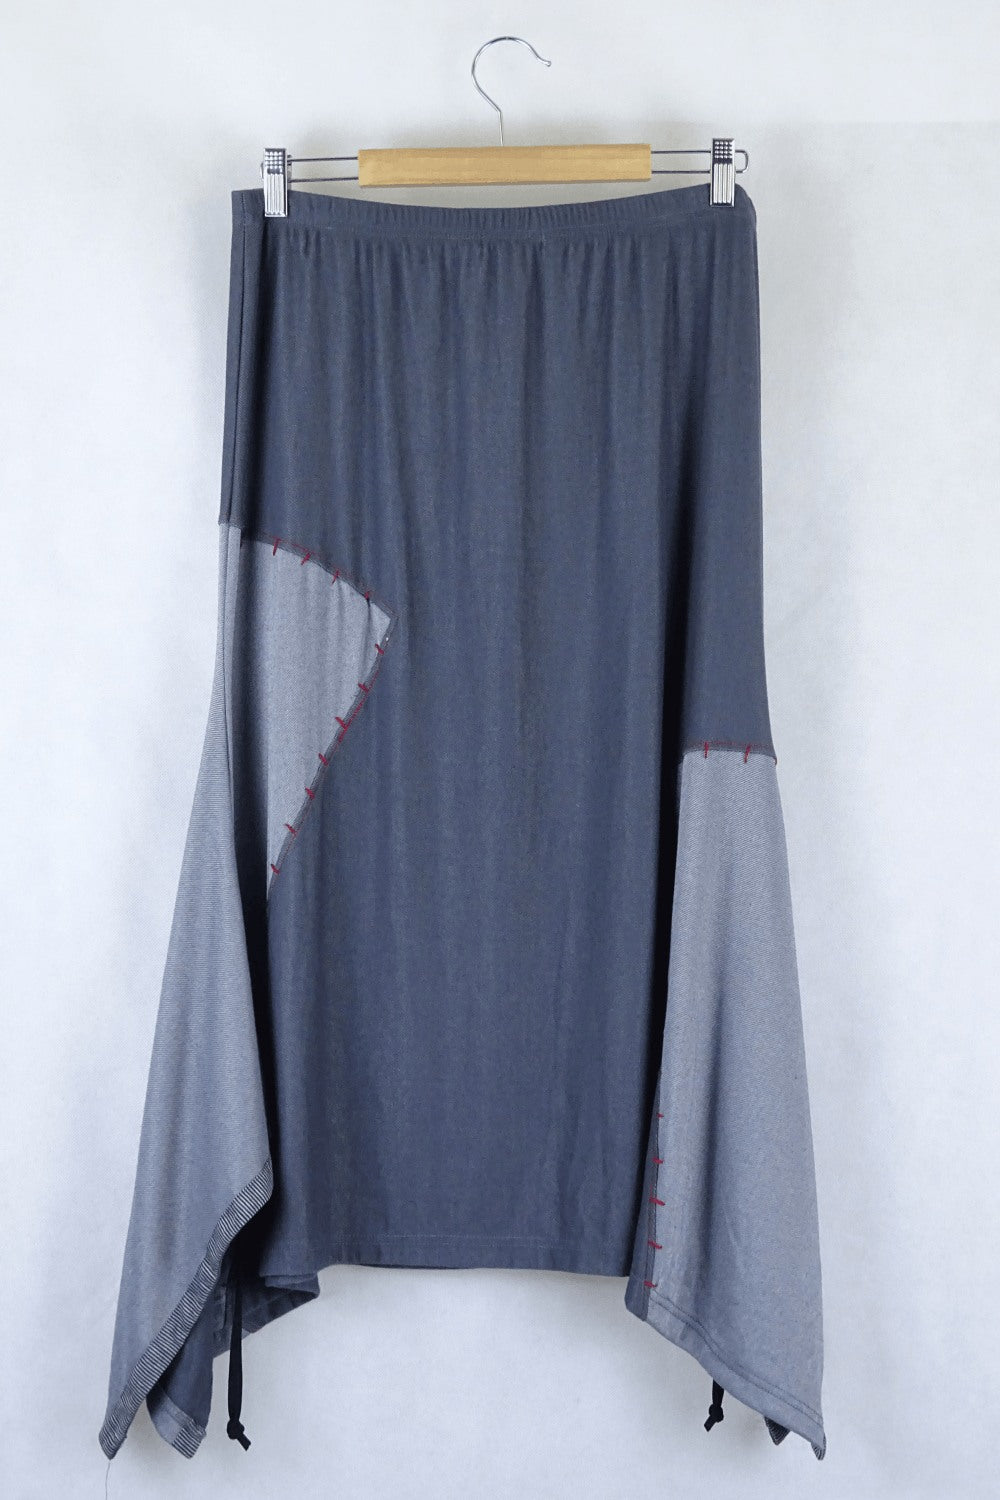 Viola Grey Skirt With Red Detail  Xl